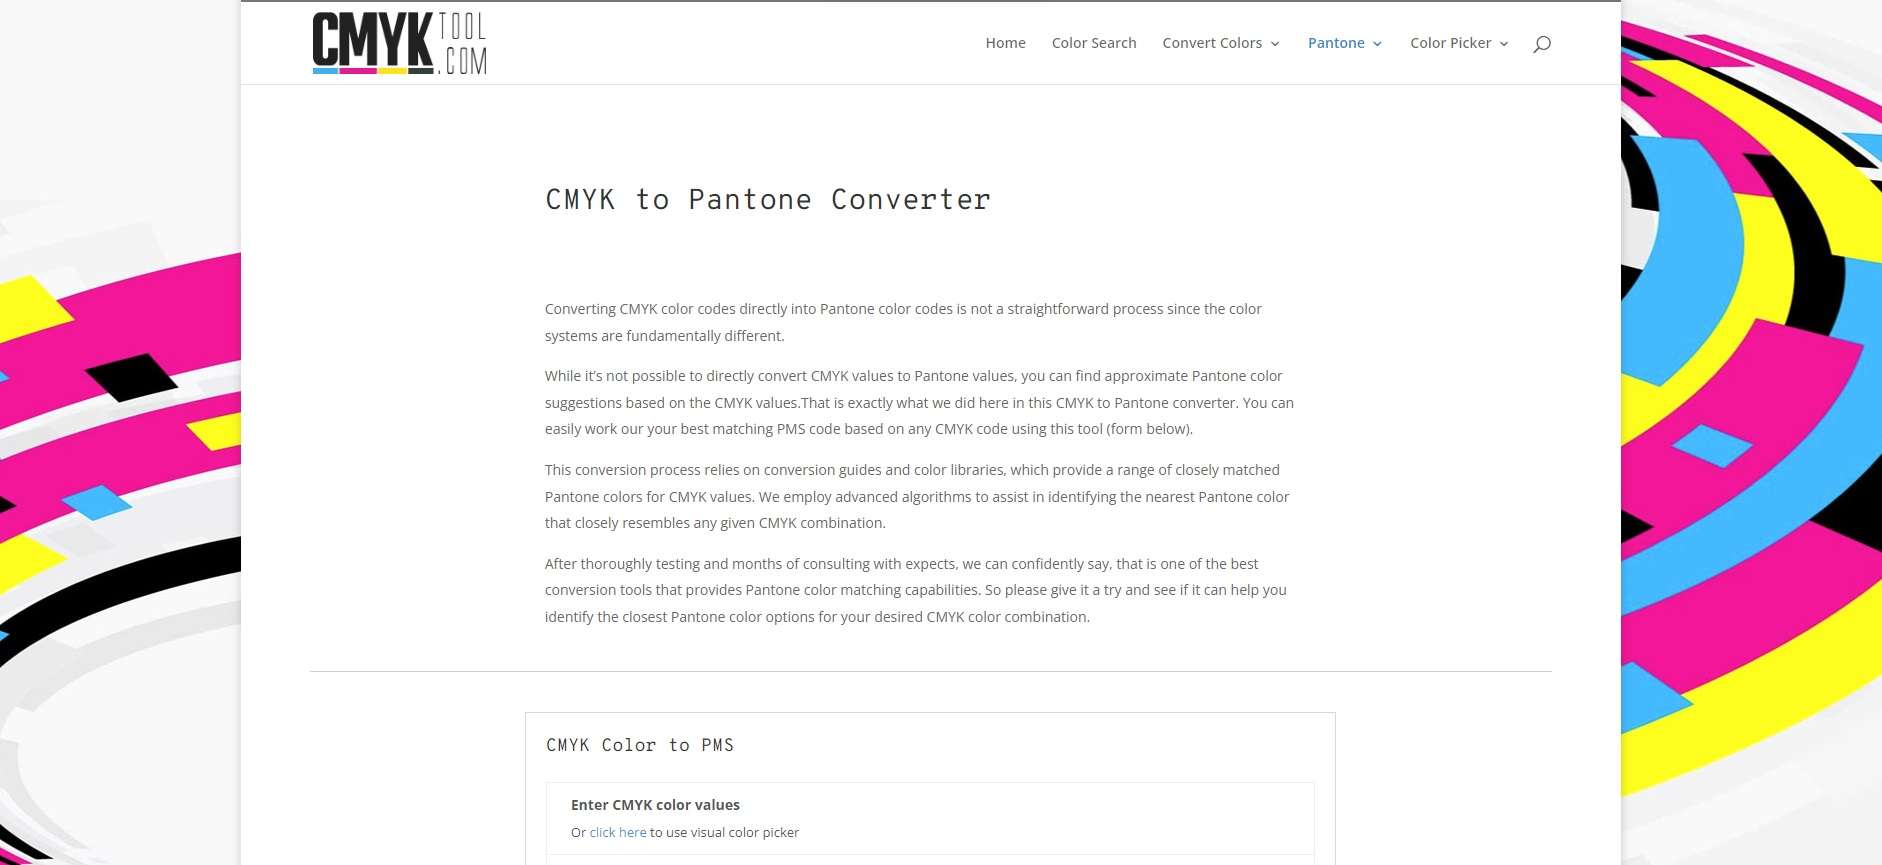 convert to pms with cmyktool